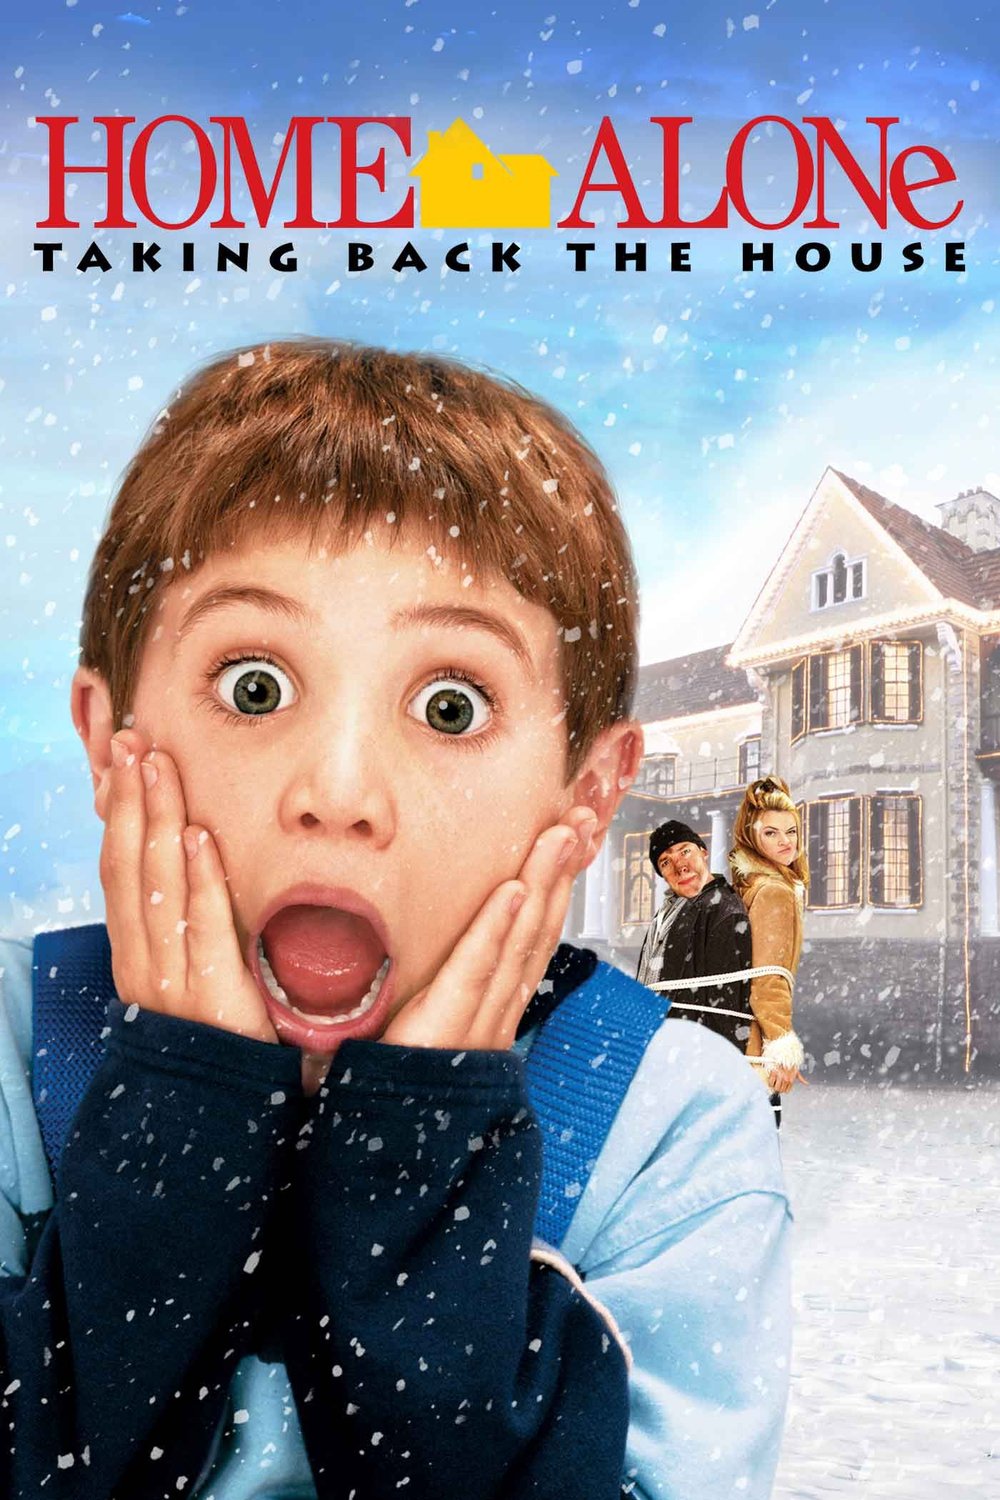 Home Alone 4 Taking Back the House (2002) by Rod Daniel